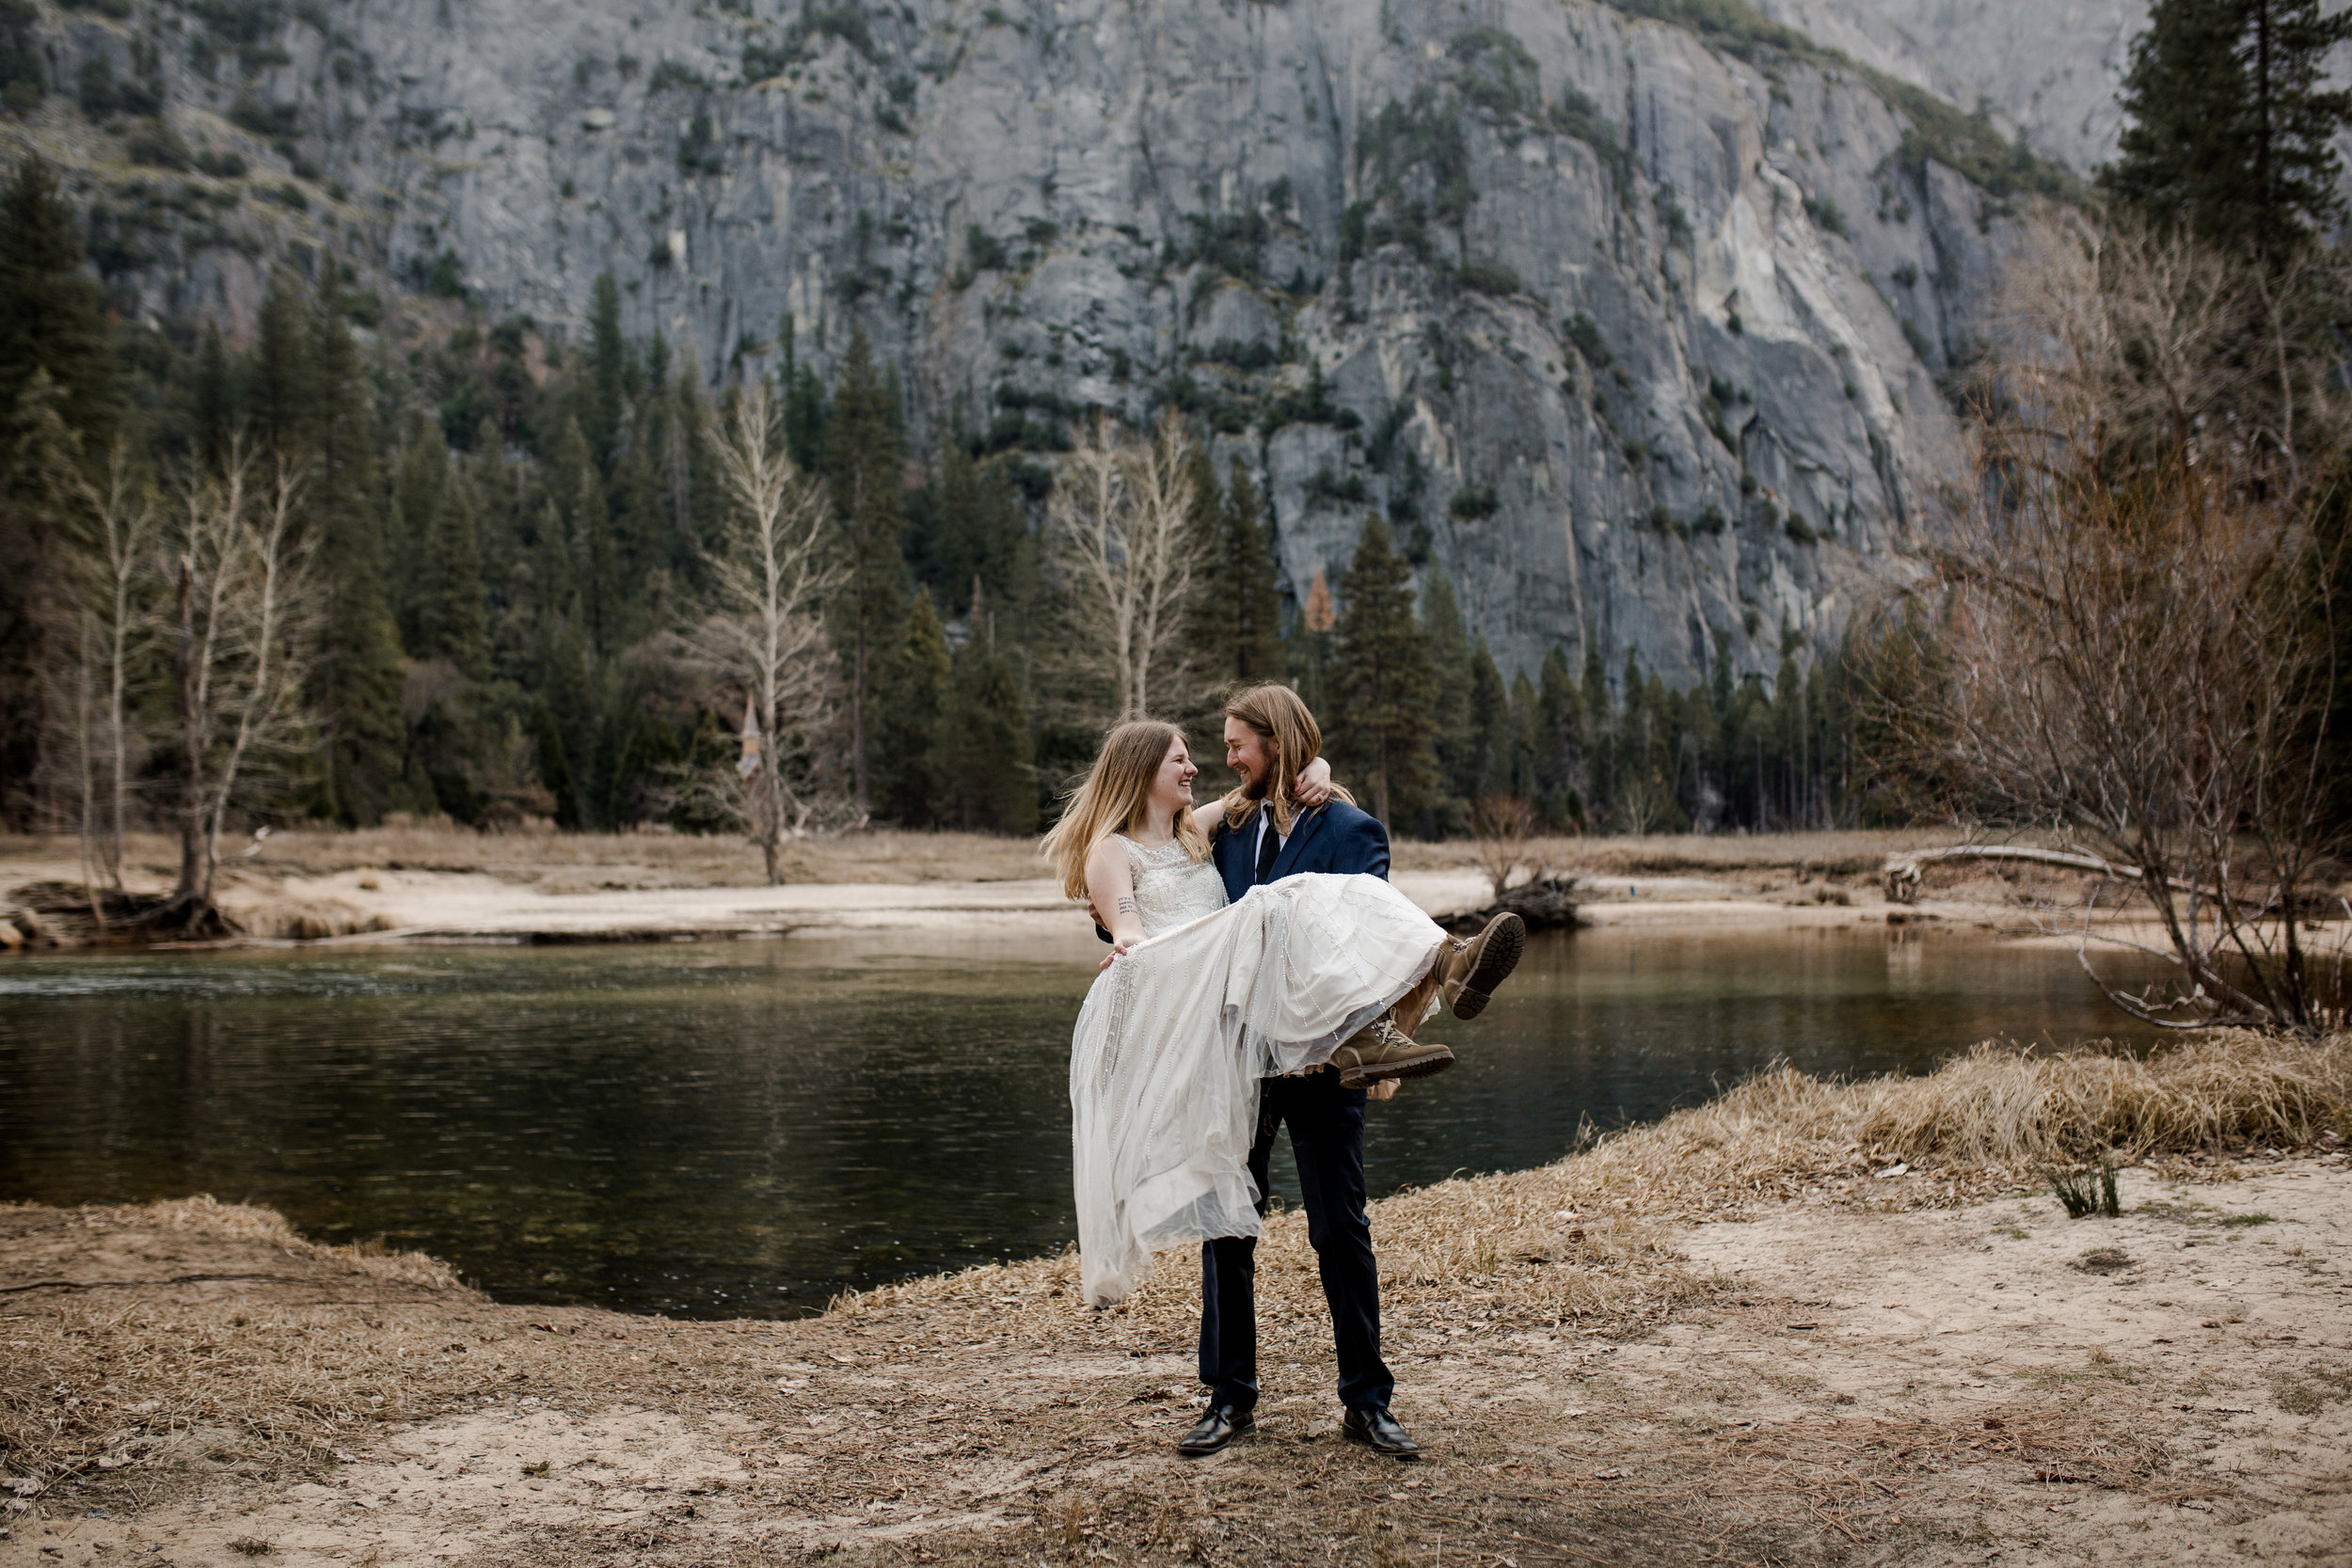 nicole-daacke-photography-yousemite-national-park-elopement-photographer-winter-cloud-moody-elope-inspiration-yosemite-valley-tunnel-view-winter-cloud-fog-weather-wedding-photos-41.jpg